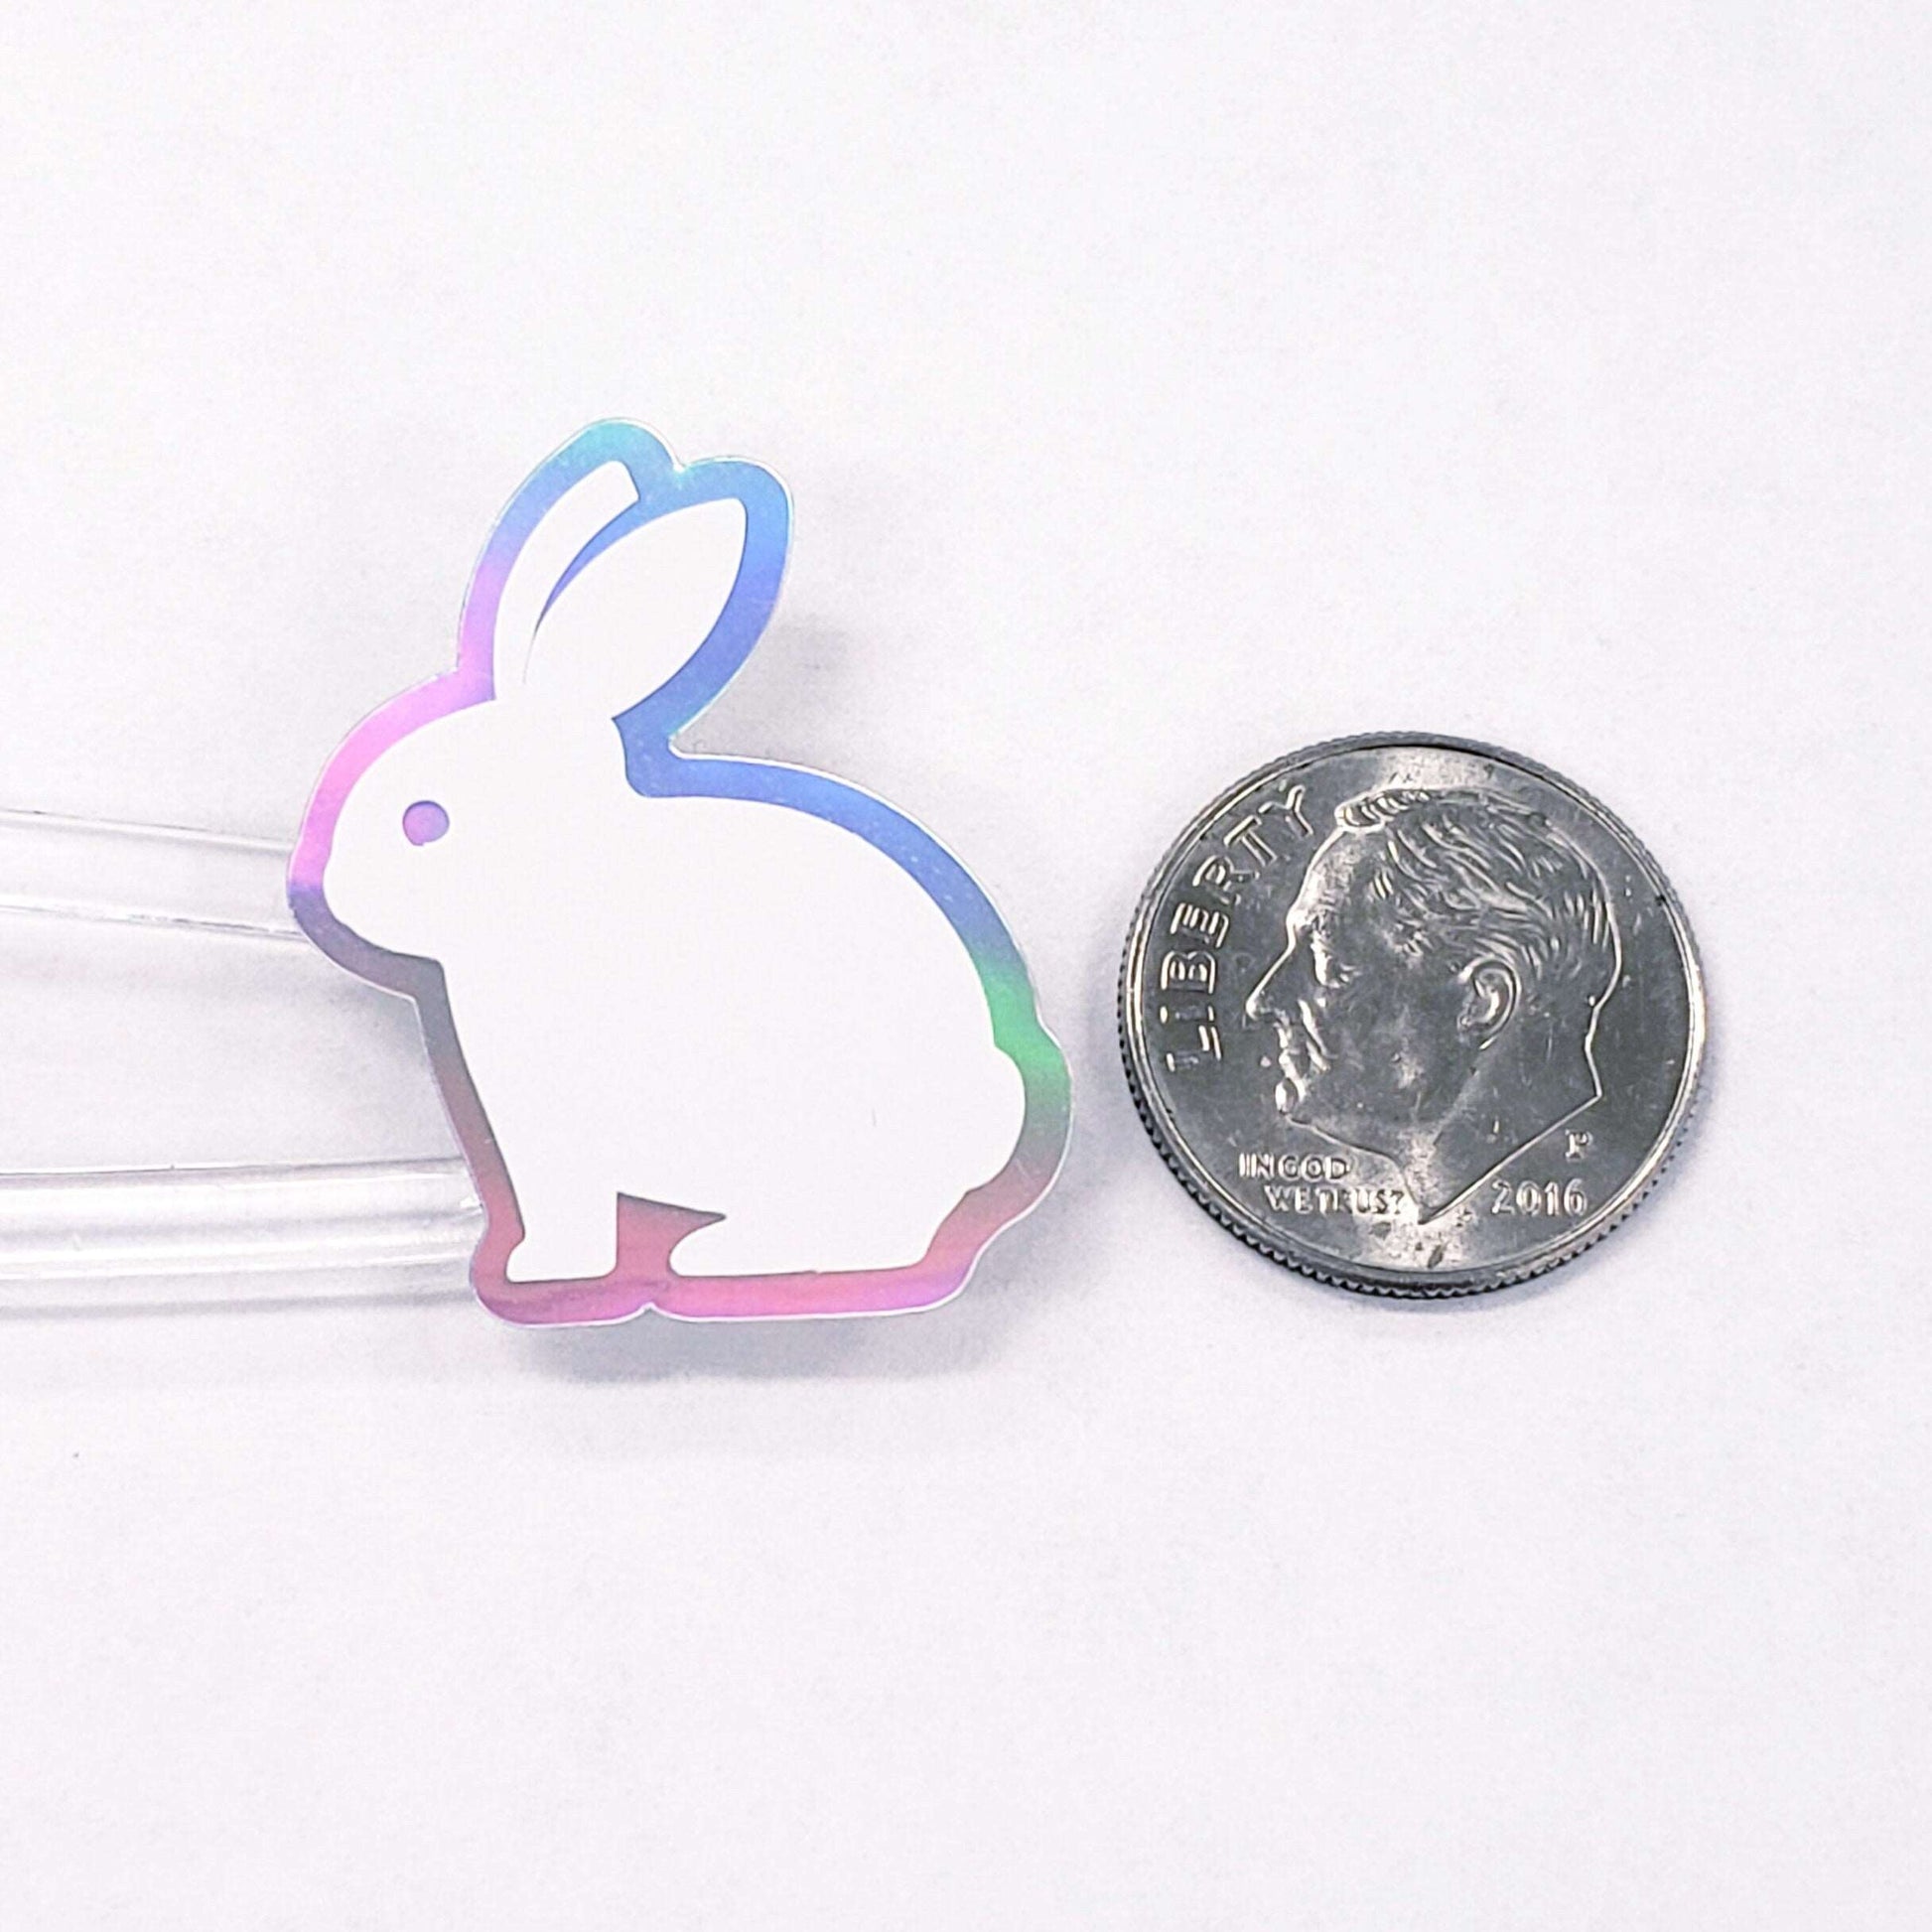 White Easter Bunny Stickers, set of 30 cute vinyl bunnies for Spring crafts, Easter baskets and cards.